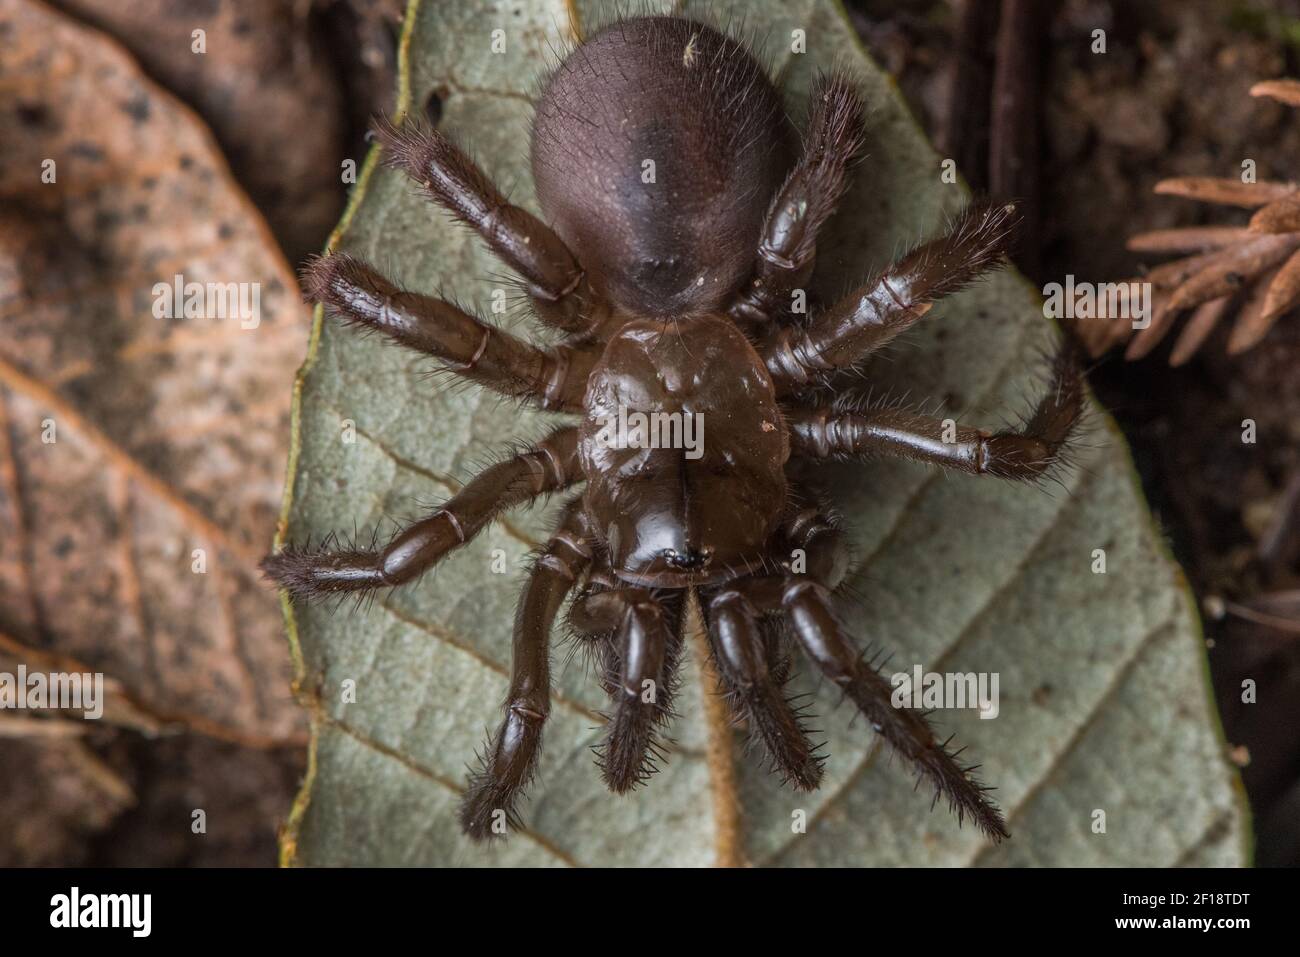 A folding trapdoor spider (Aliatypus californicus), a mygalomorph species endemic to California, found crawling on the forest floor at night. Stock Photo